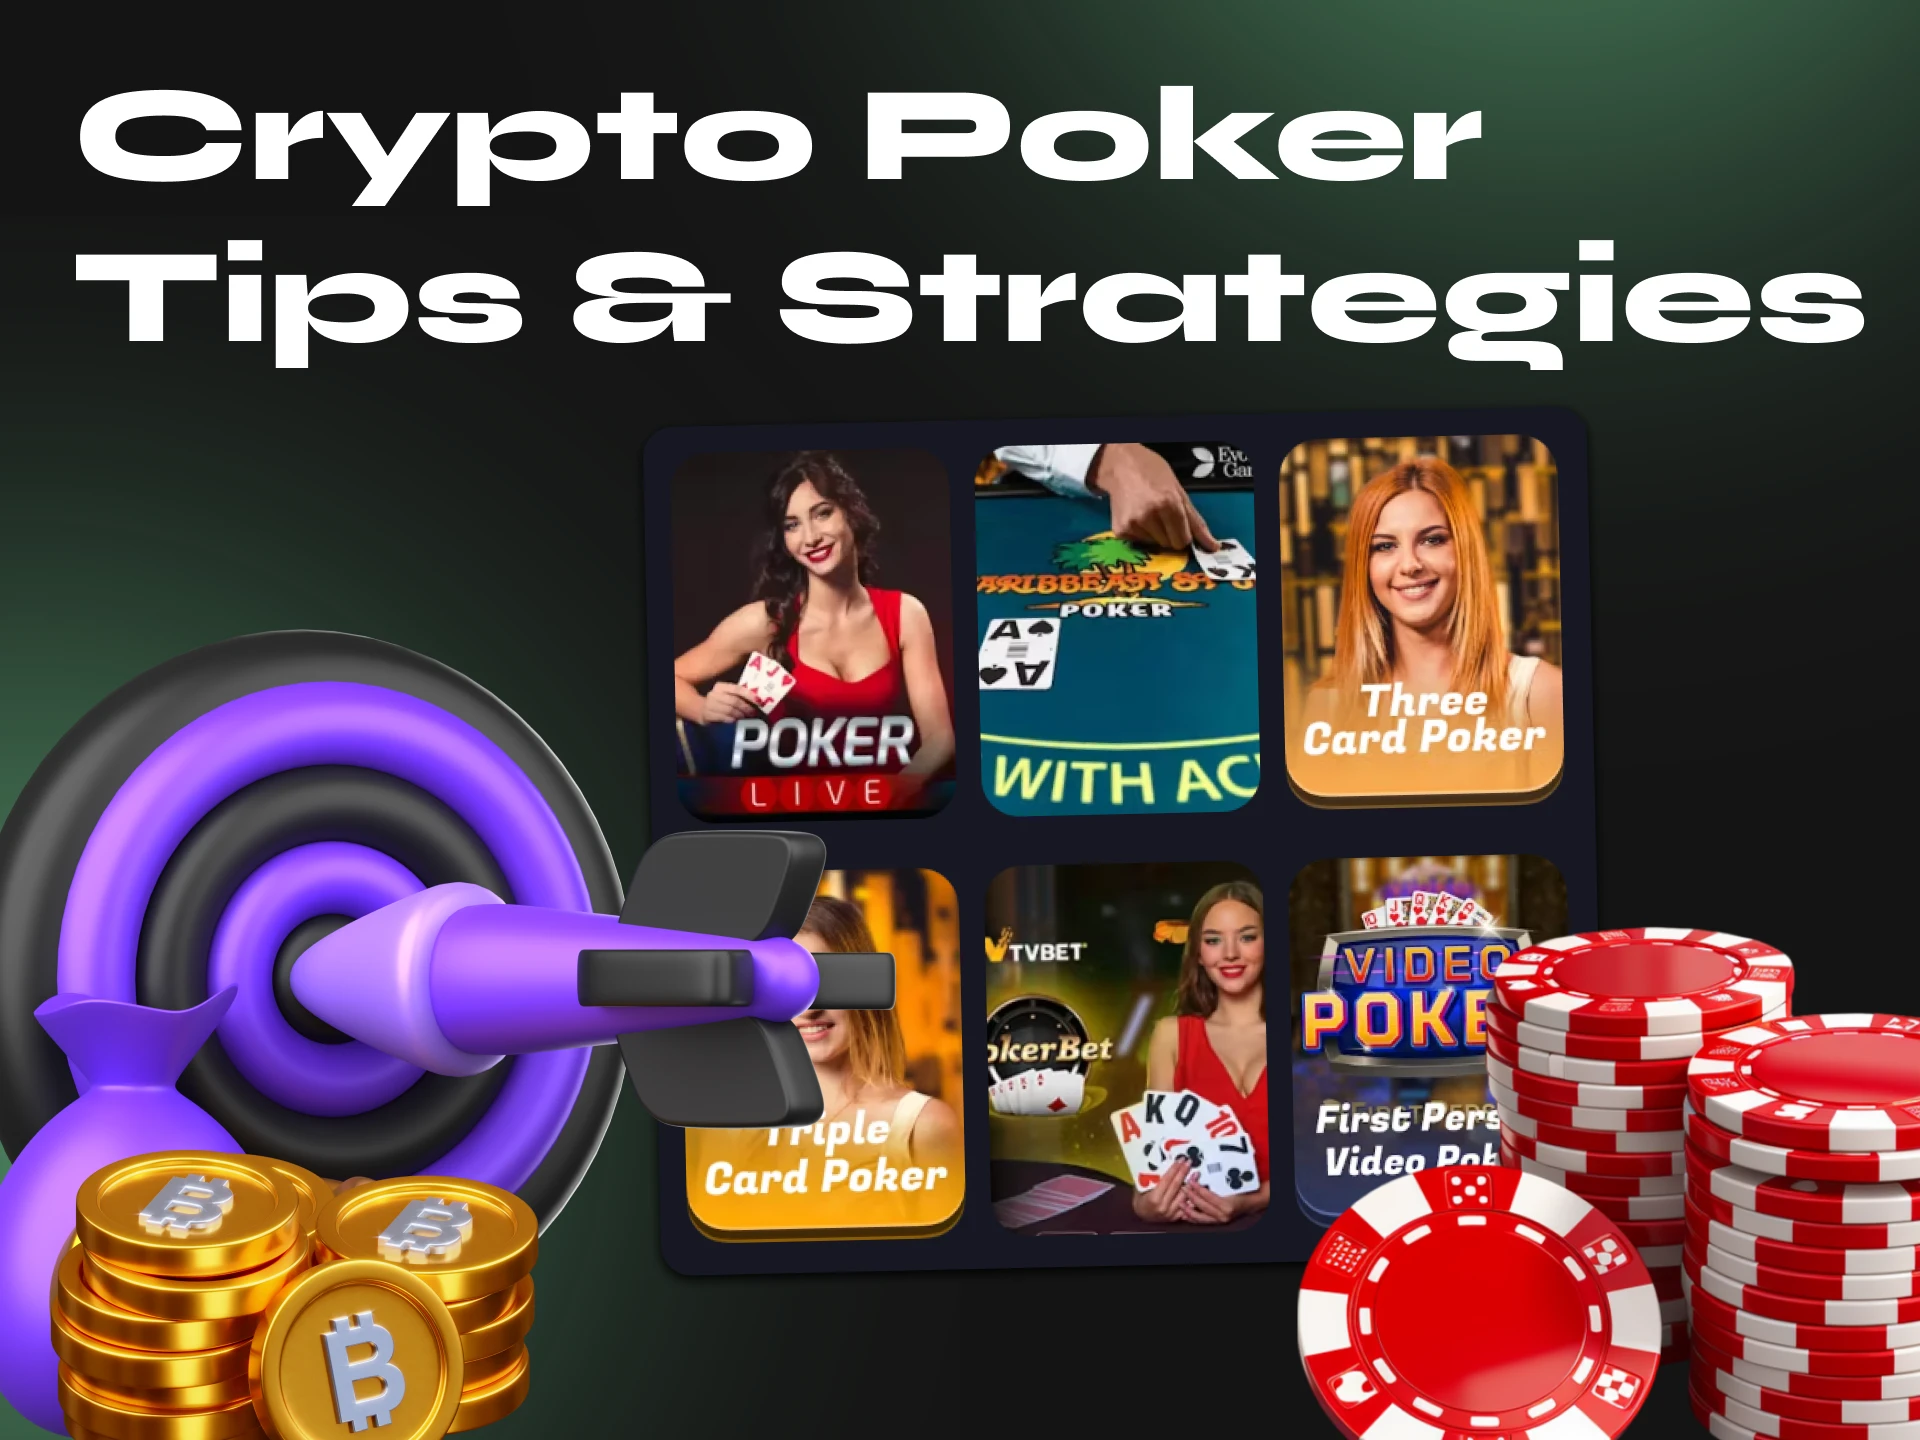 Use these tips to play poker for cryptocurrency.